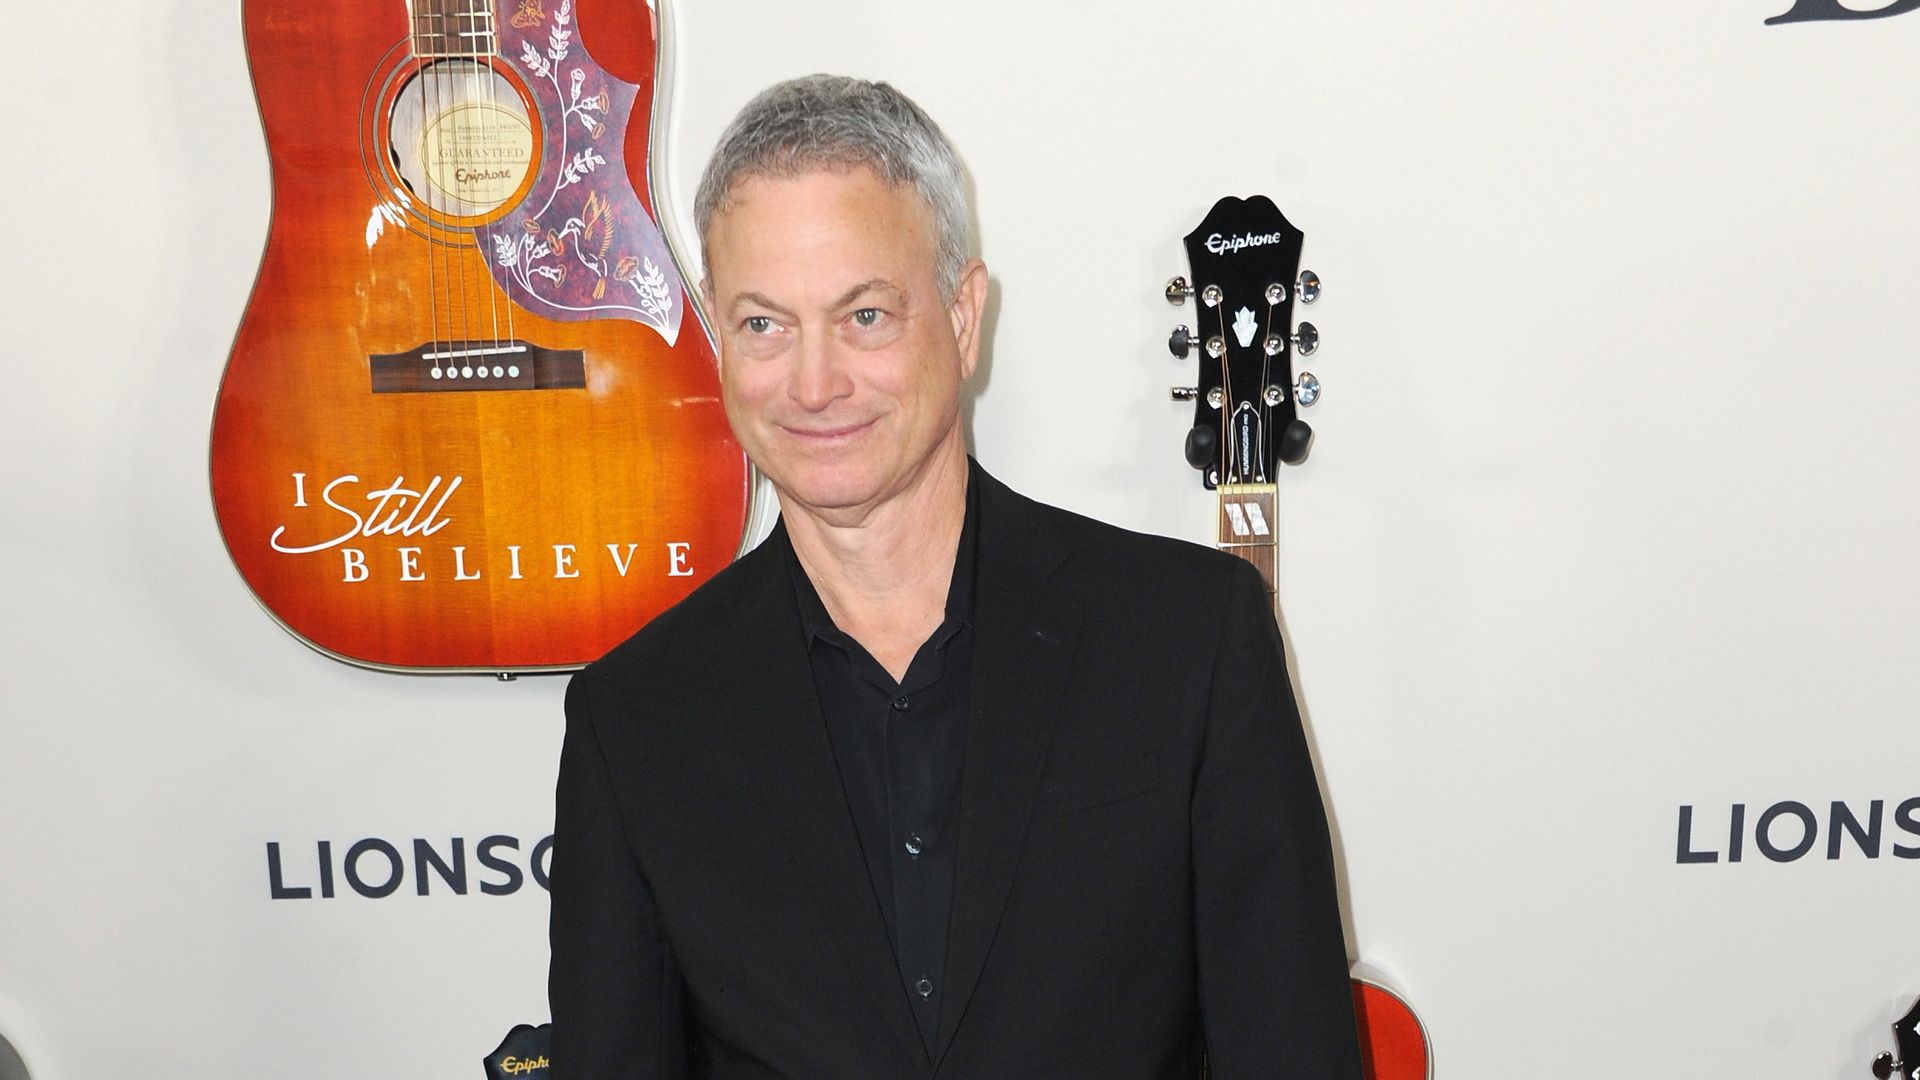 Gary Sinise arrives for the Premiere Of Lionsgate's "I Still Believe" held at ArcLight Hollywood on March 7, 2020 in Hollywood, California